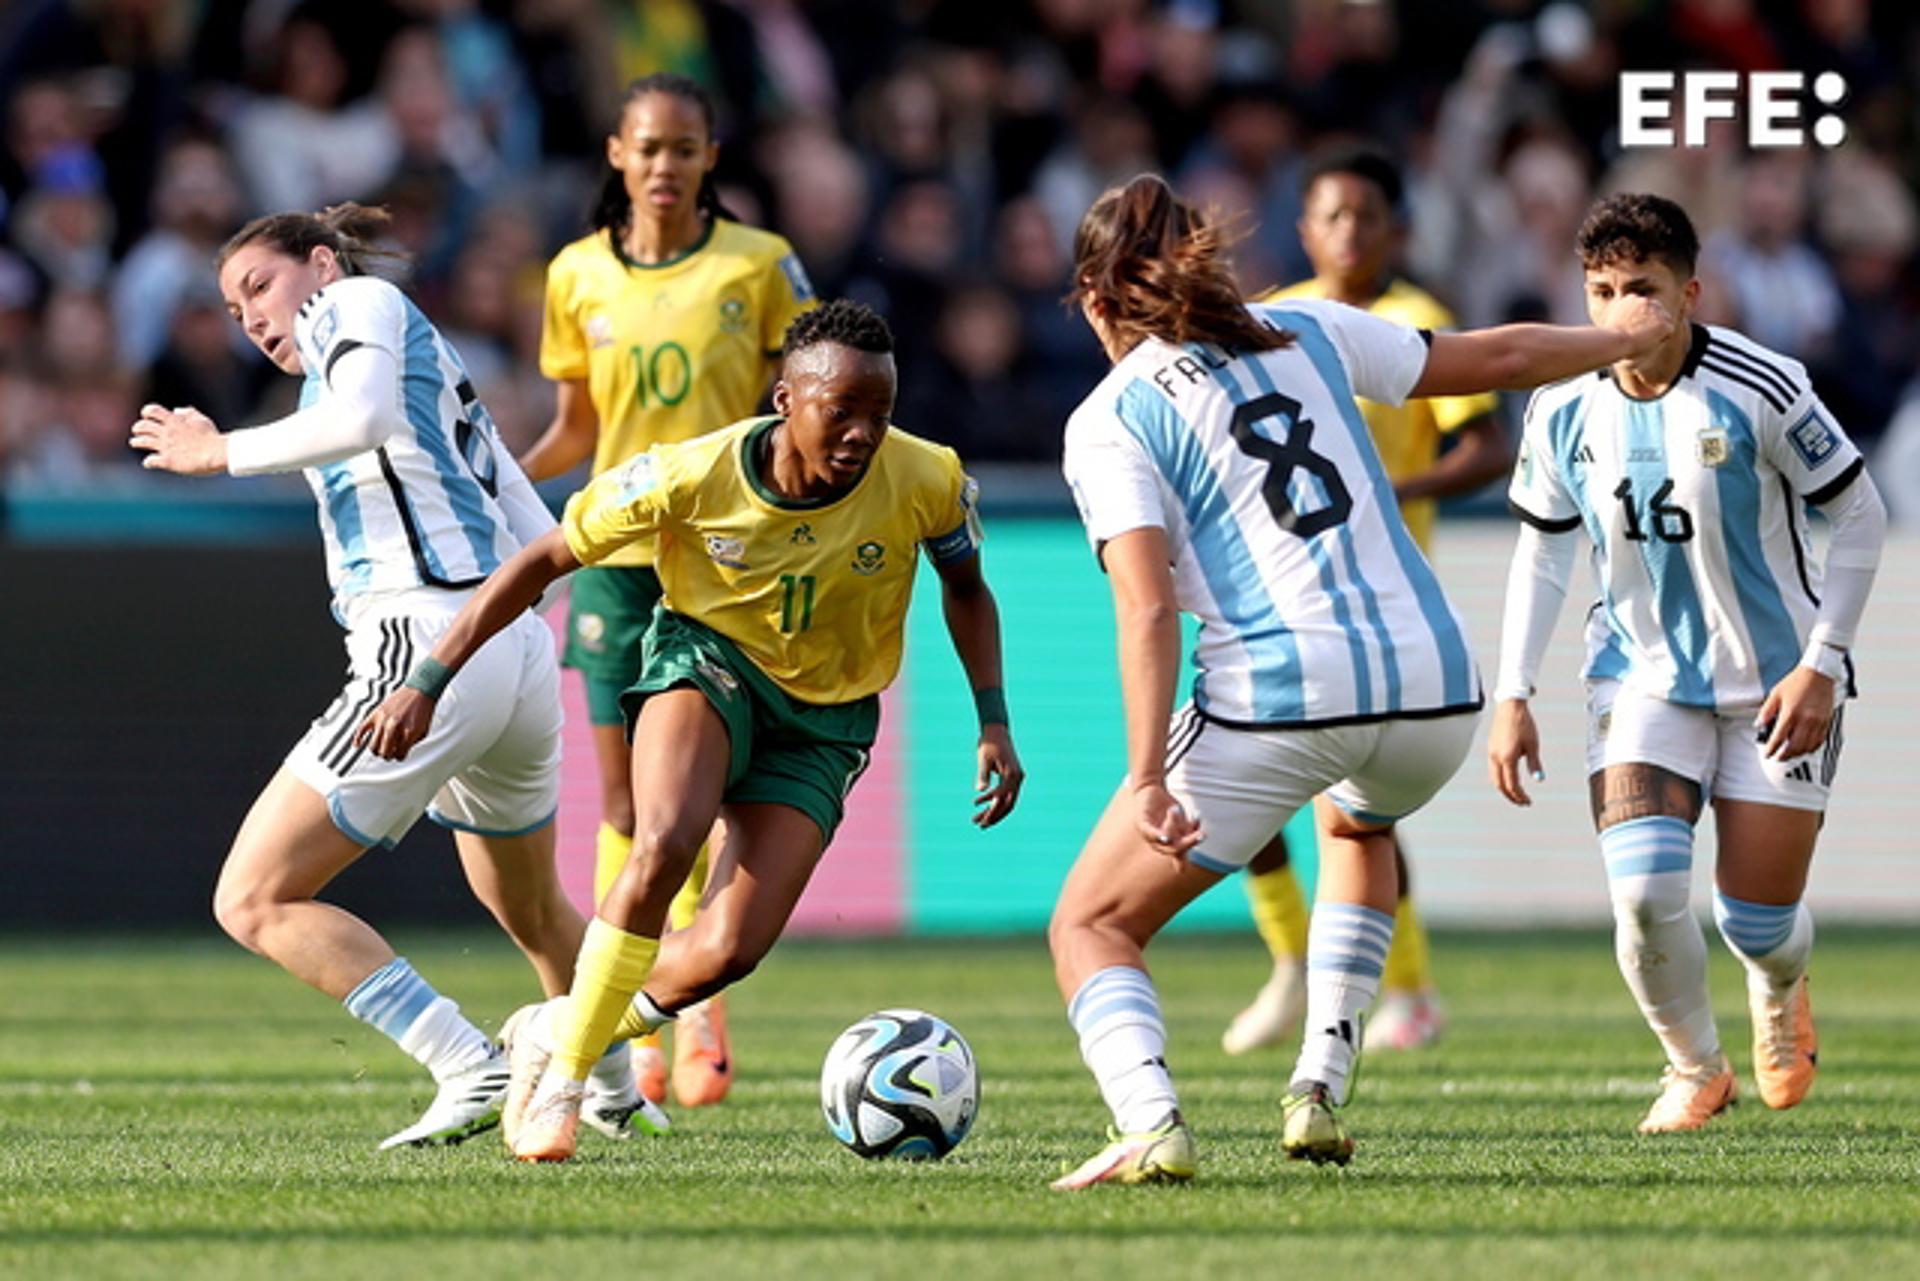 South Africa's Thembi Kgatlana (in yellow) tries to get past Argentine defenders during the FIFA Women's World Cup Group G match in Dunedin, New Zealand. EFE/EPA/RITCHIE B. TONGO
